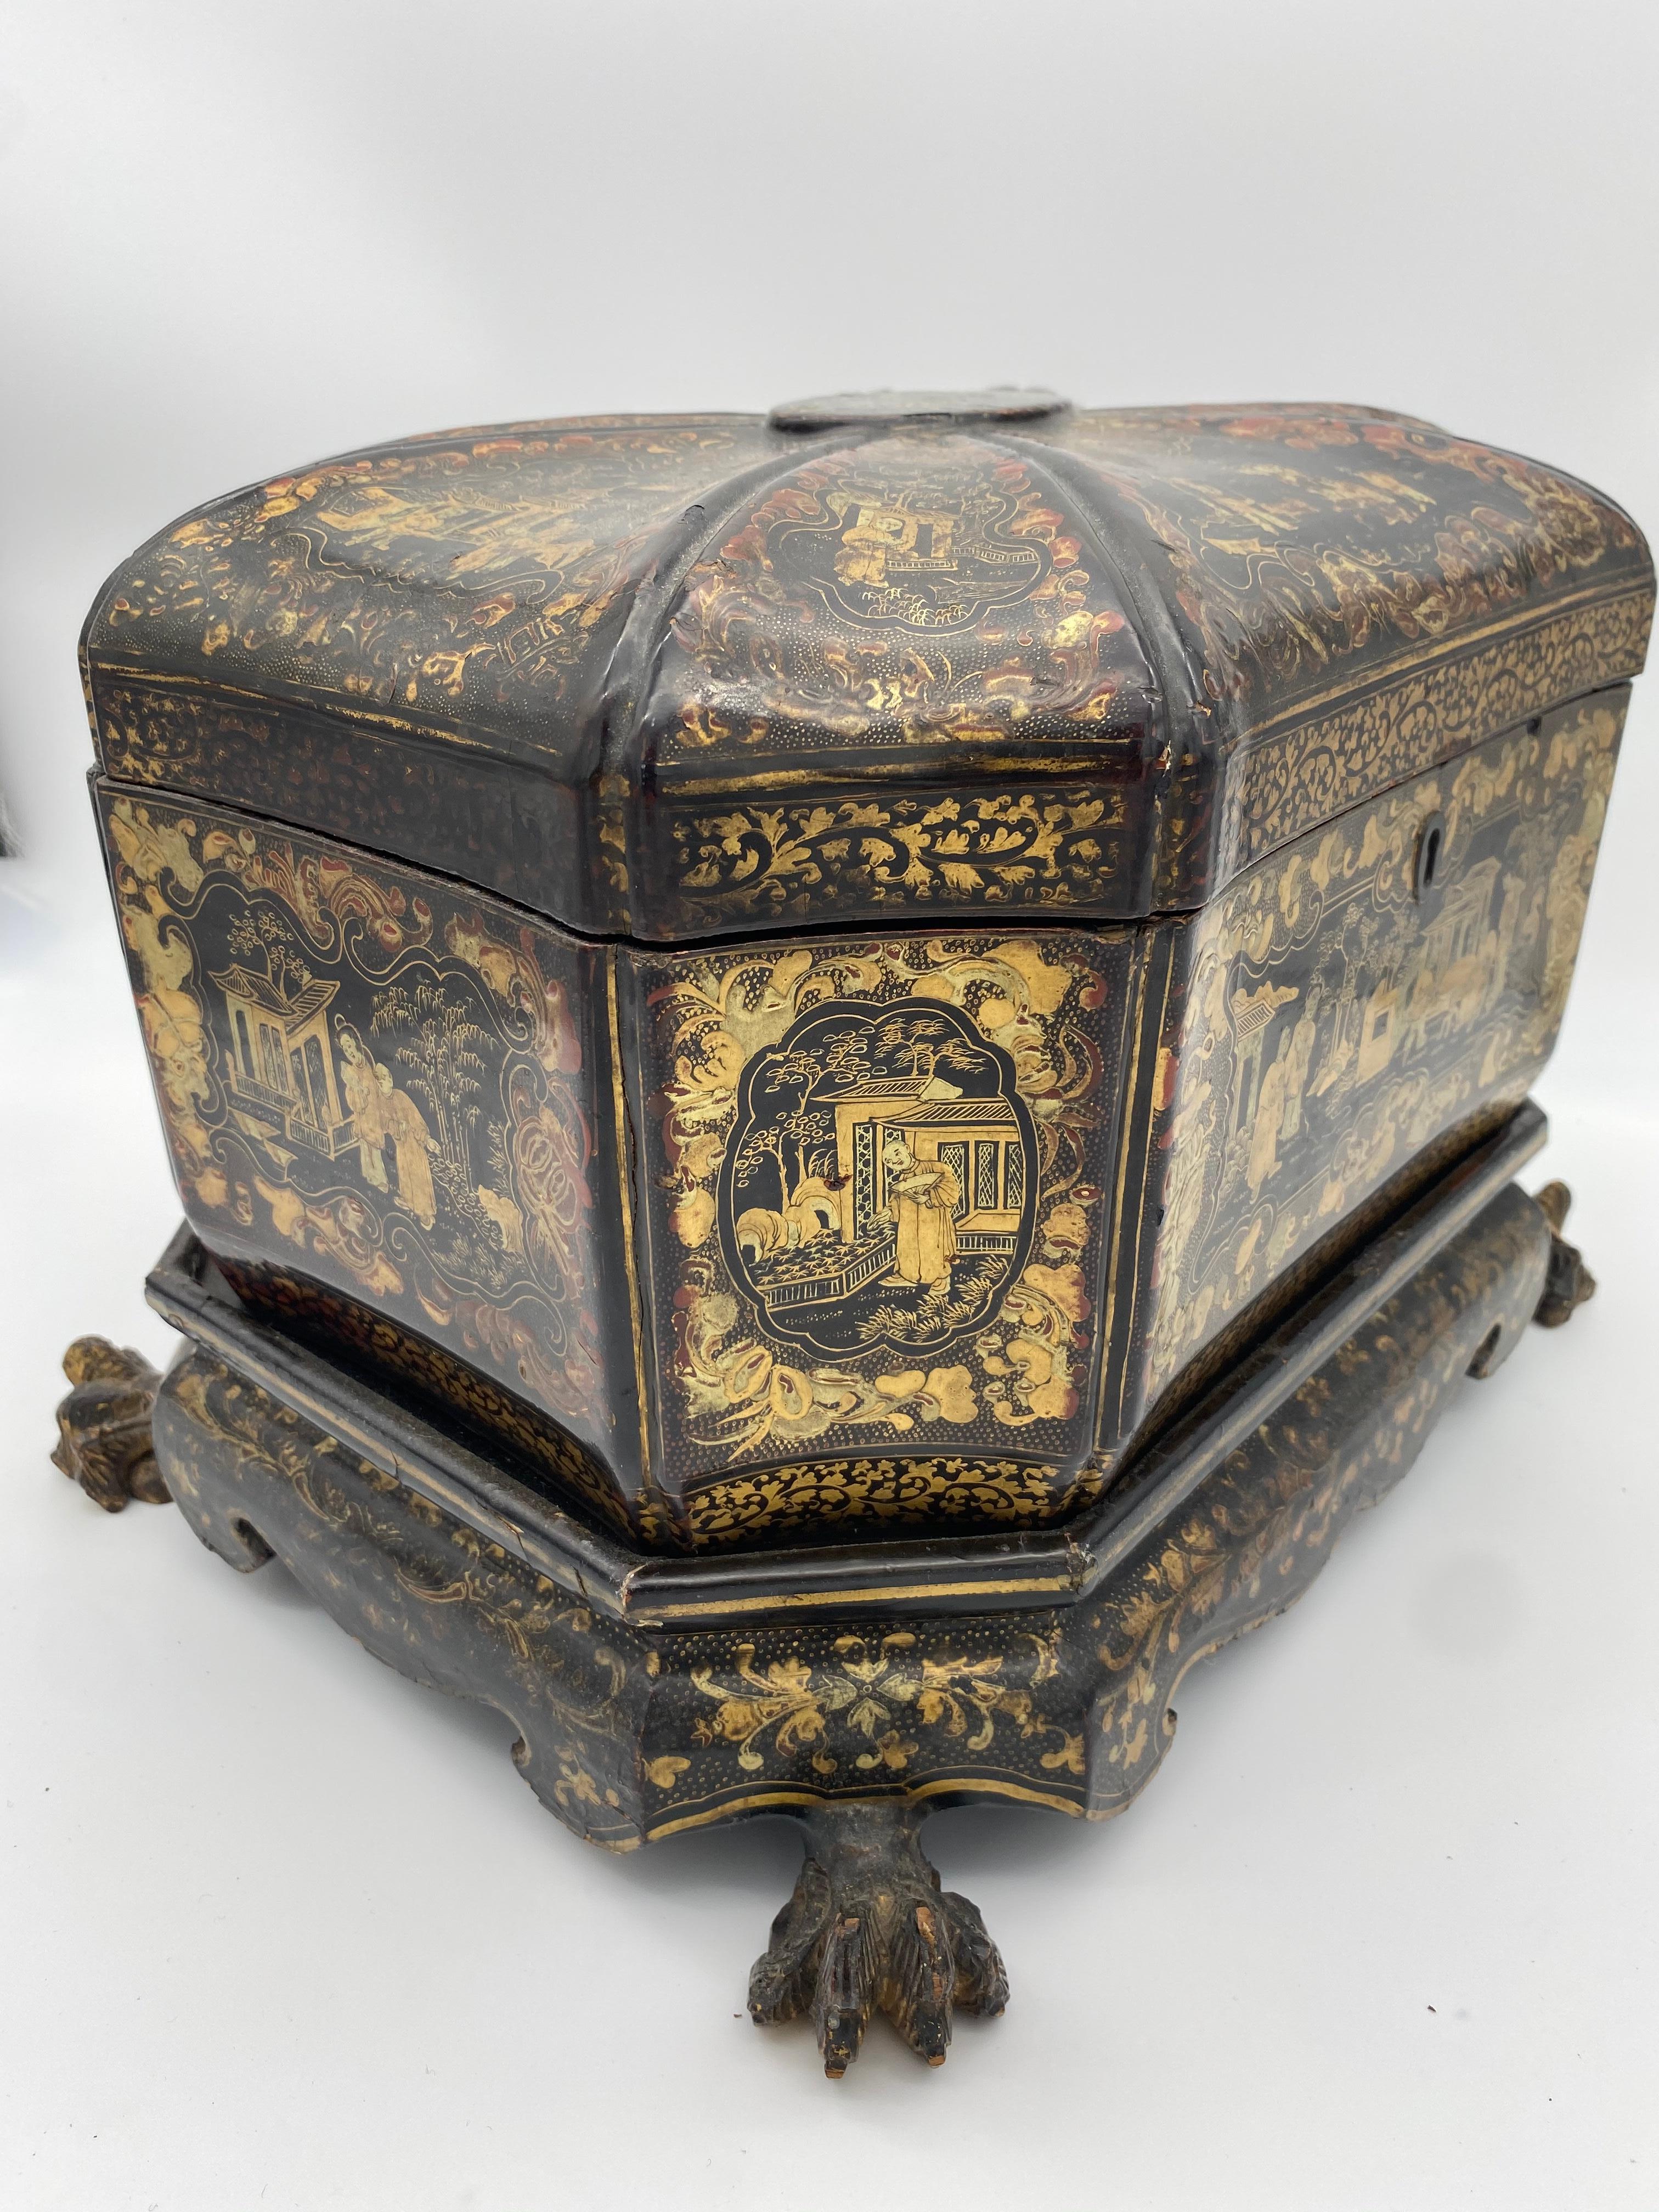 Middle 19th century Chinese Export double lacquer tea caddy on stand  from the Qing dynasty. octagonal form with hinged lid ,divided interior with metal caddies , mounted on conforming base with carved paw feet ,H10'',W14'',D11'', Decorated all over